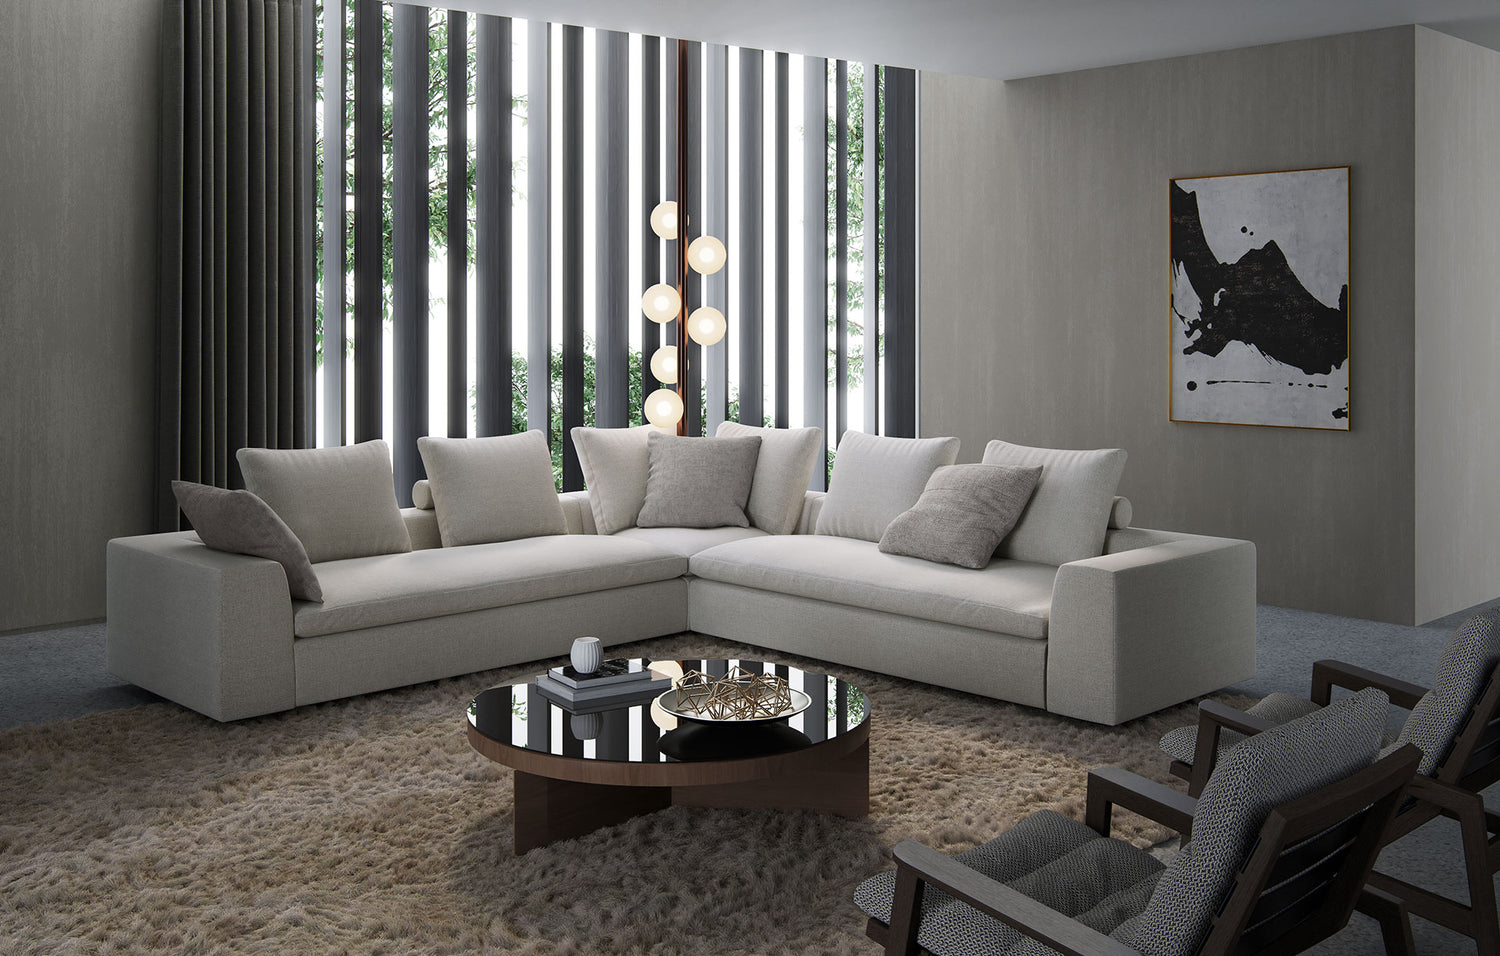 A white, three-piece sectional couch in a modern living room.